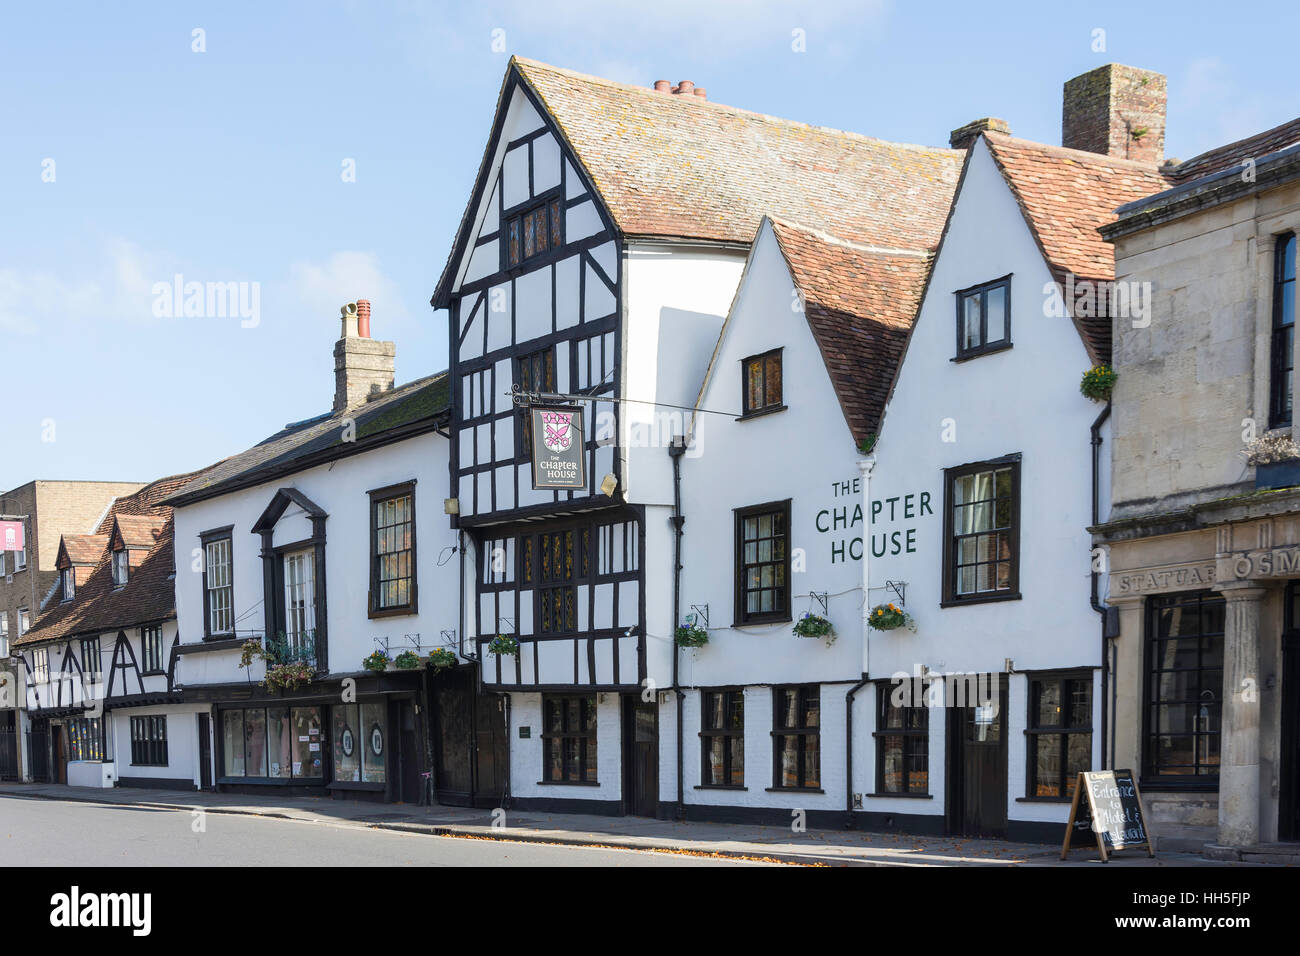 13th century Kings Arms Hotel And Chapter House Restaurant, St John's Street, Salisbury, Wiltshire, England, United Kingdom Stock Photo